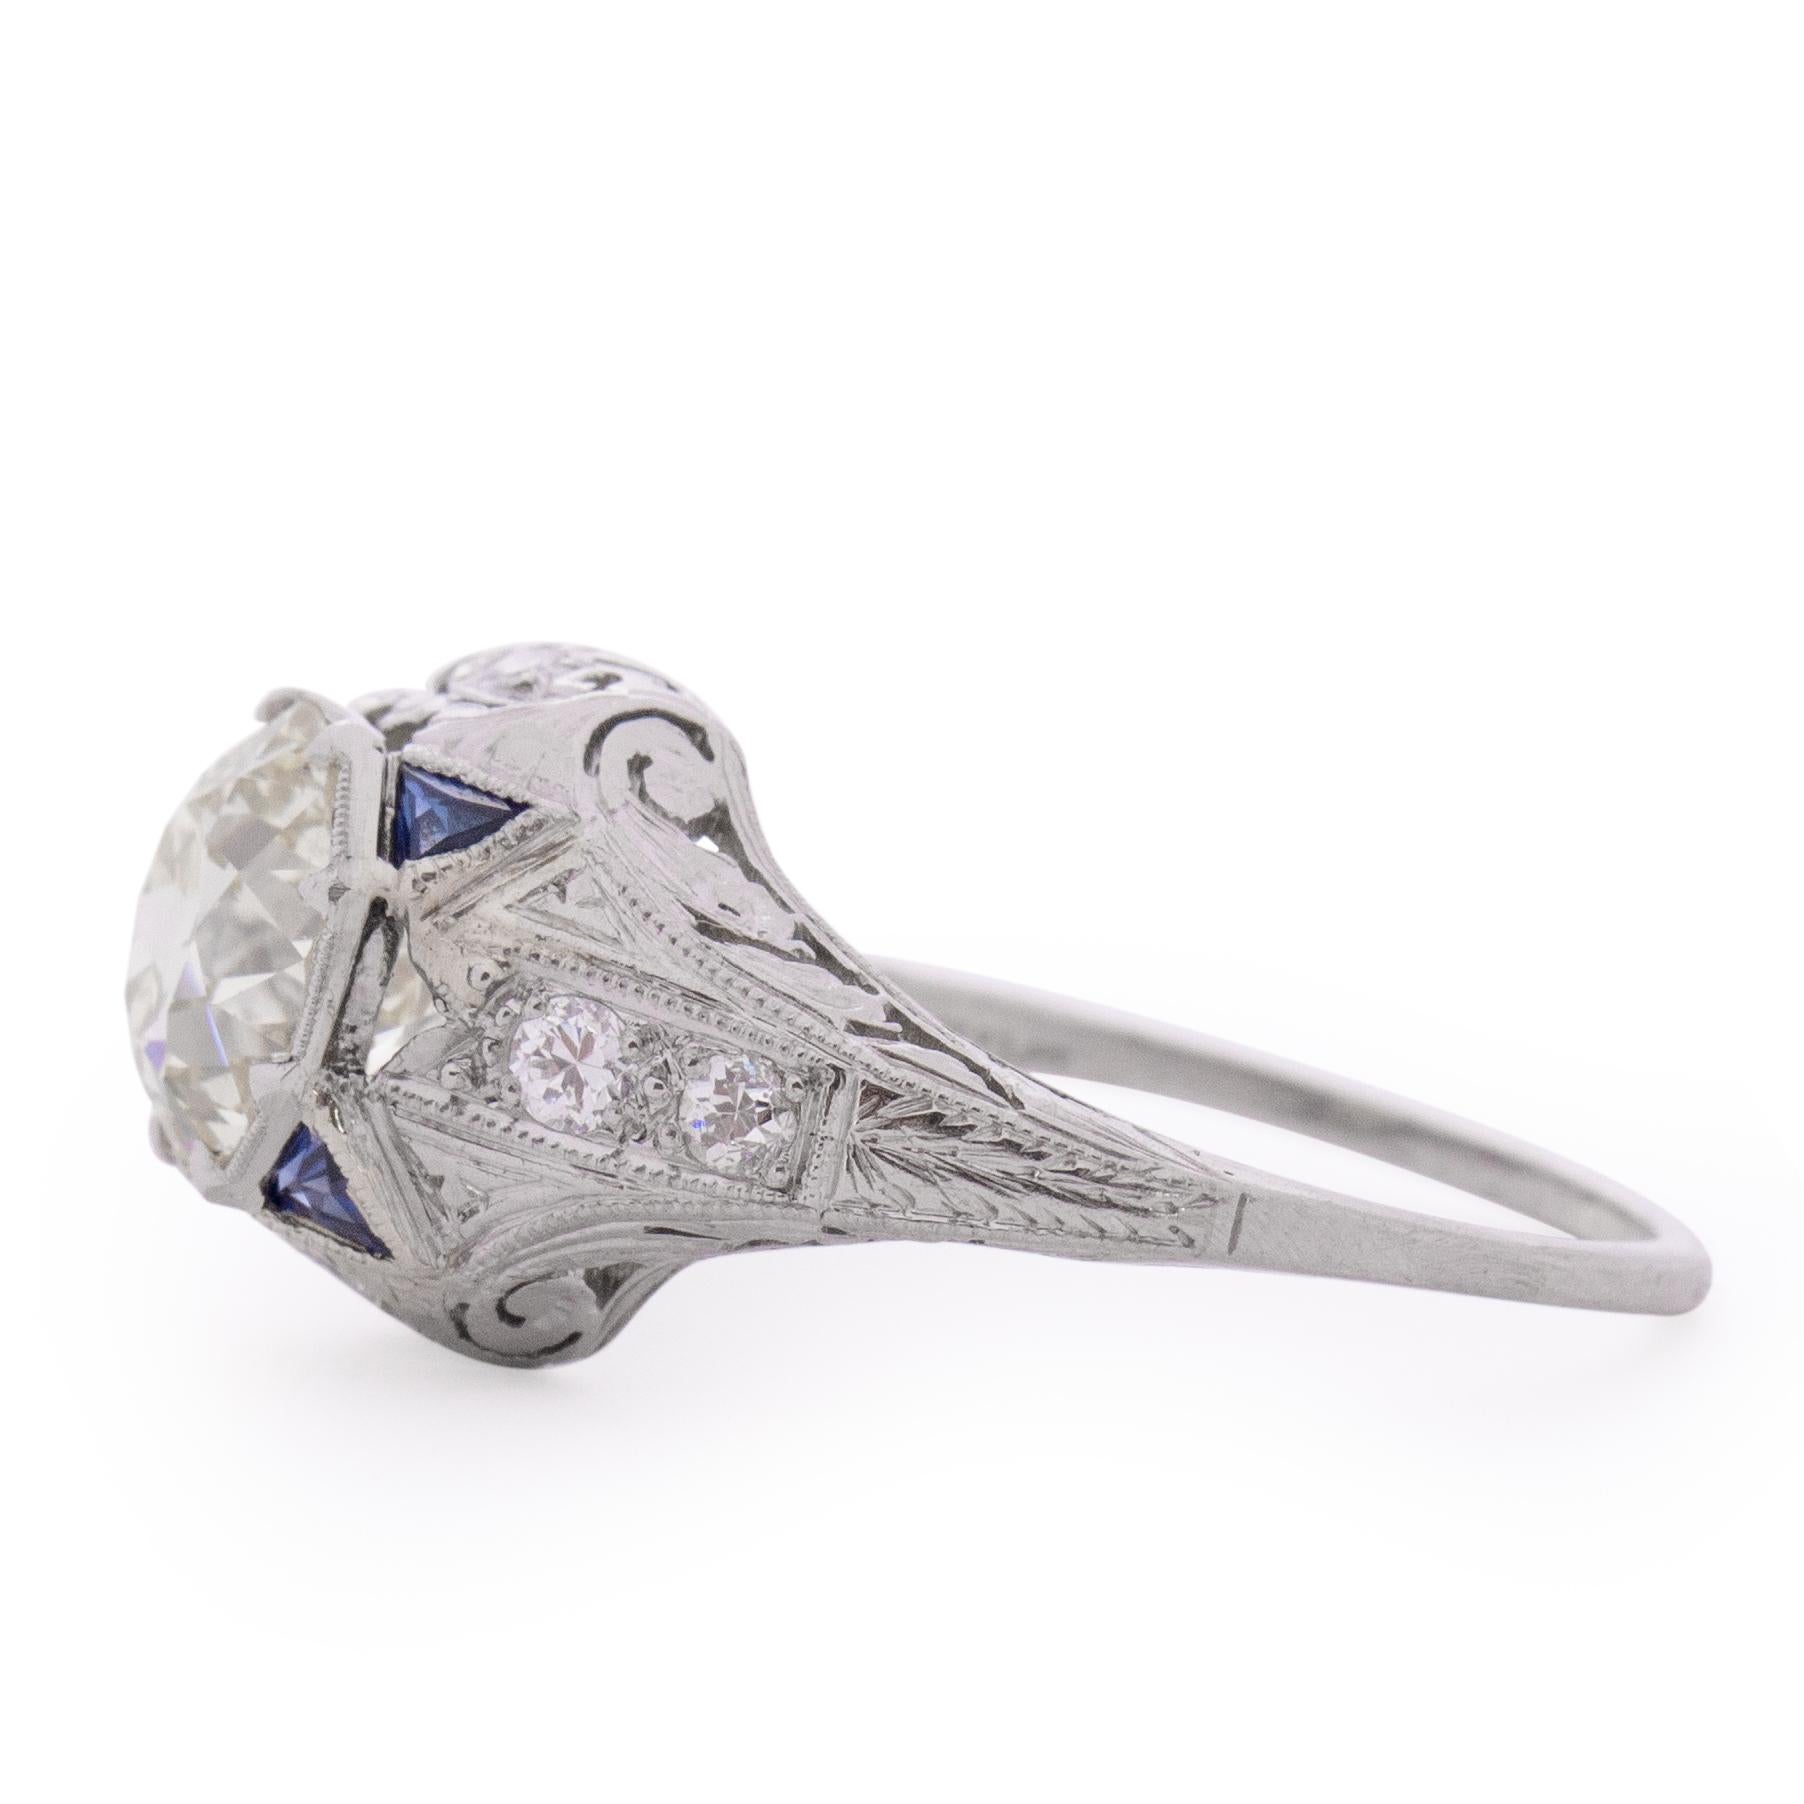 Round Cut Platinum Filigree Setting with 2.08 Ct Center Diamond, Accented with Sapphires